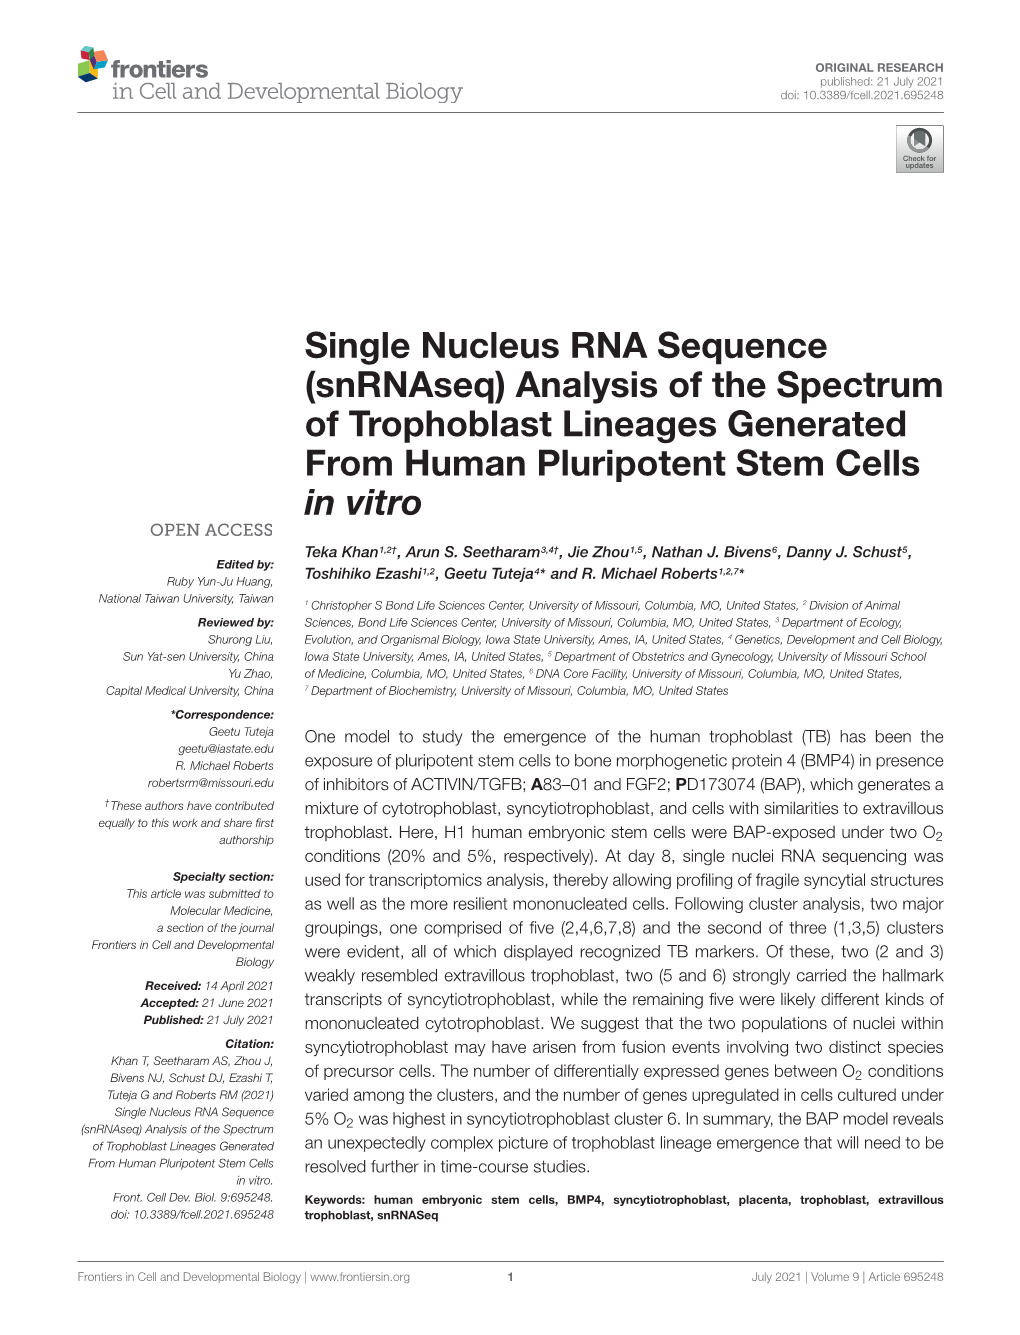 Single Nucleus RNA Sequence (Snrnaseq) Analysis of the Spectrum of Trophoblast Lineages Generated from Human Pluripotent Stem Cells in Vitro